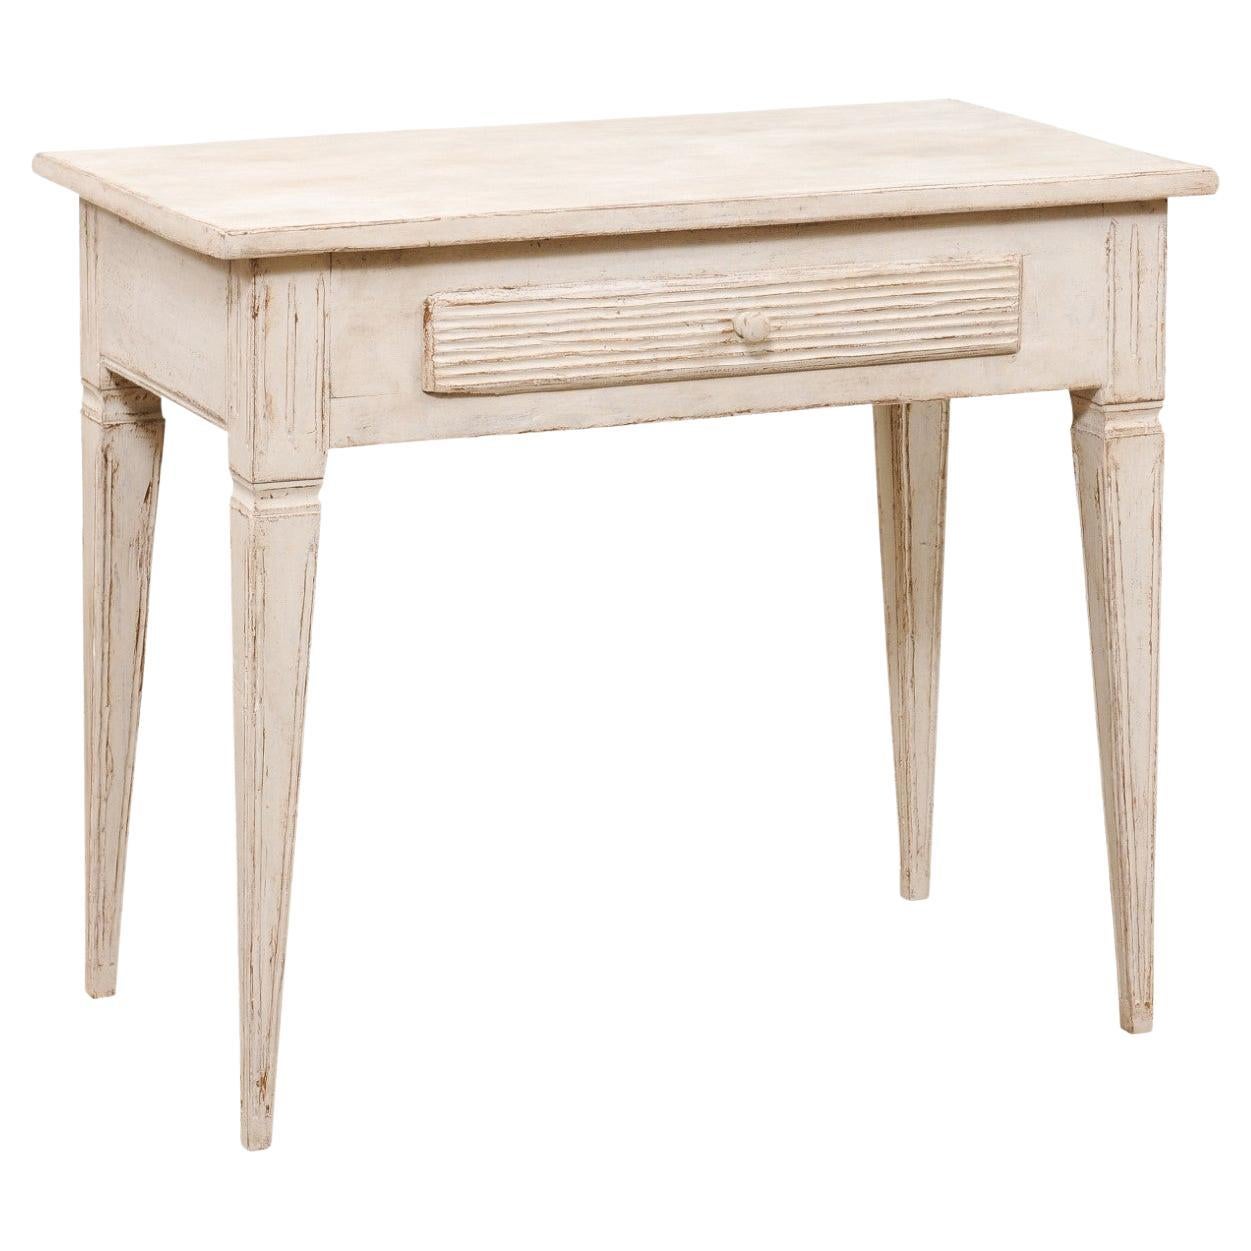 Swedish Gustavian Style Painted Side Table with Reeded Drawer and Tapered Legs